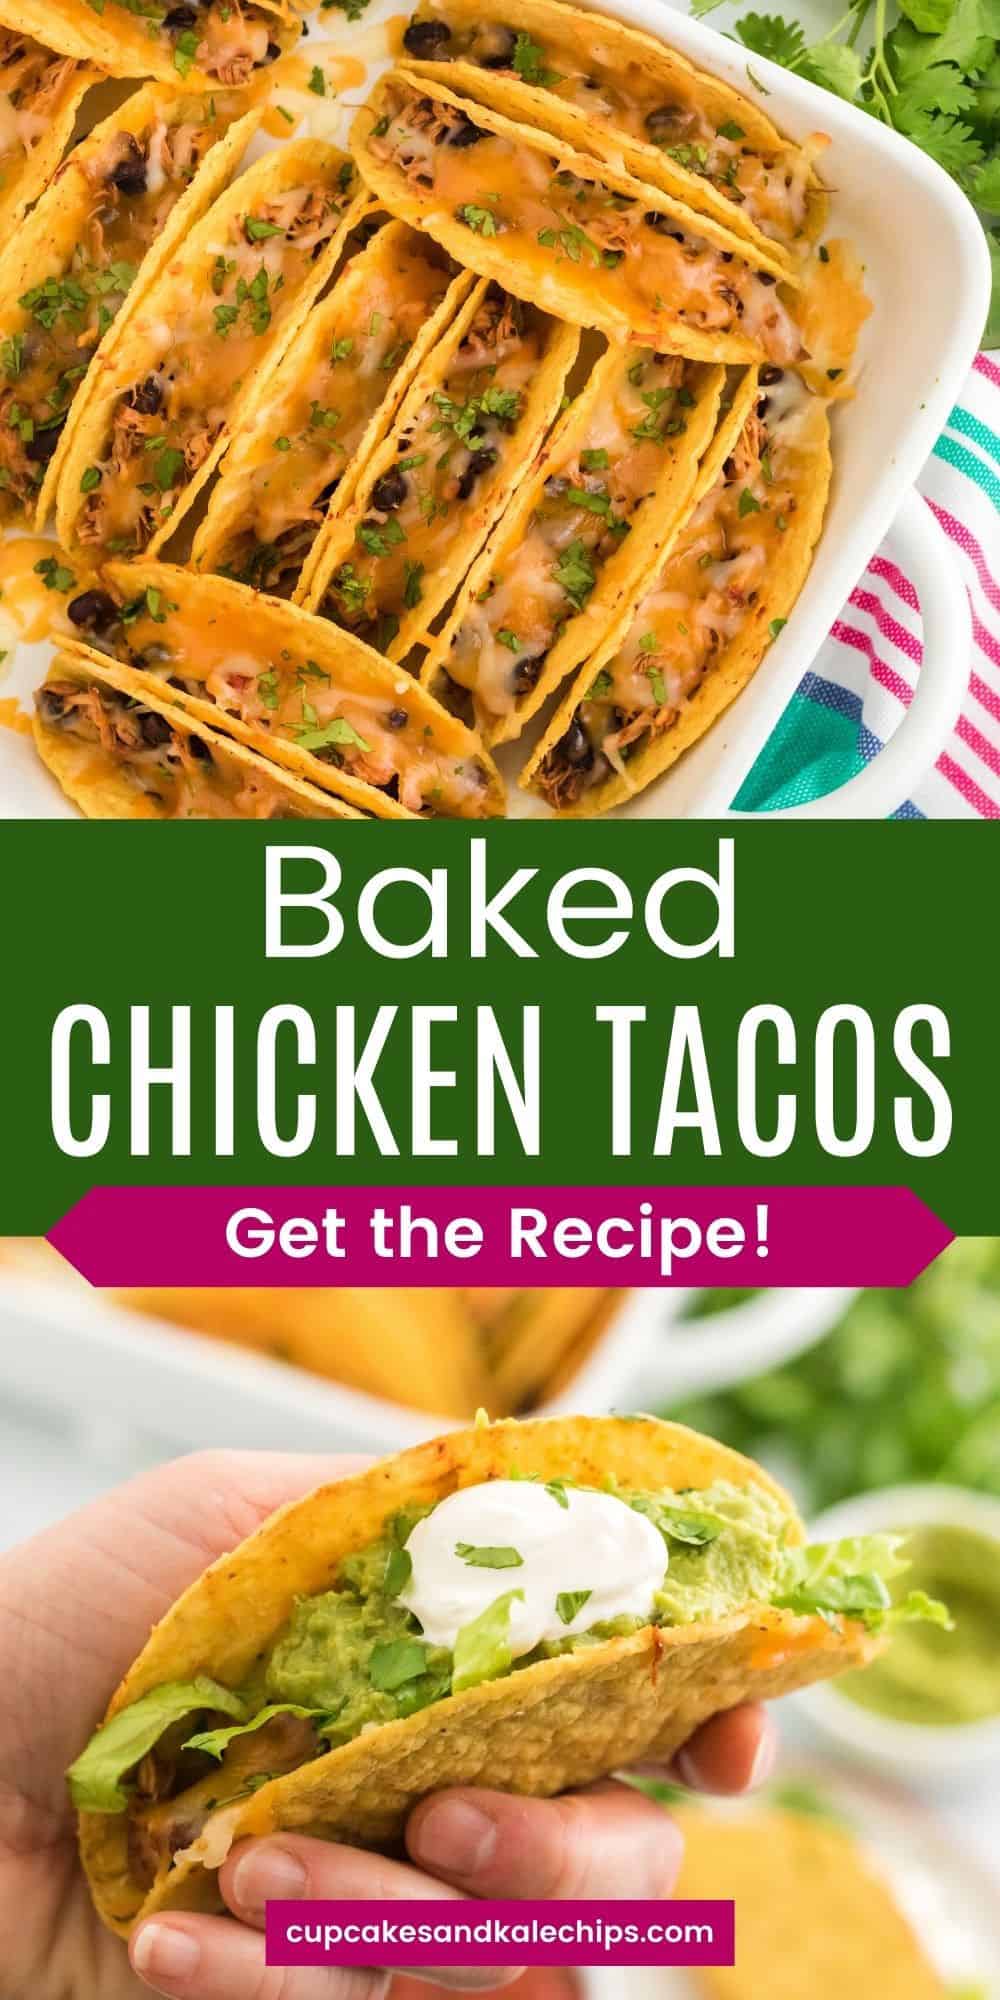 Baked Chicken Tacos | Cupcakes & Kale Chips